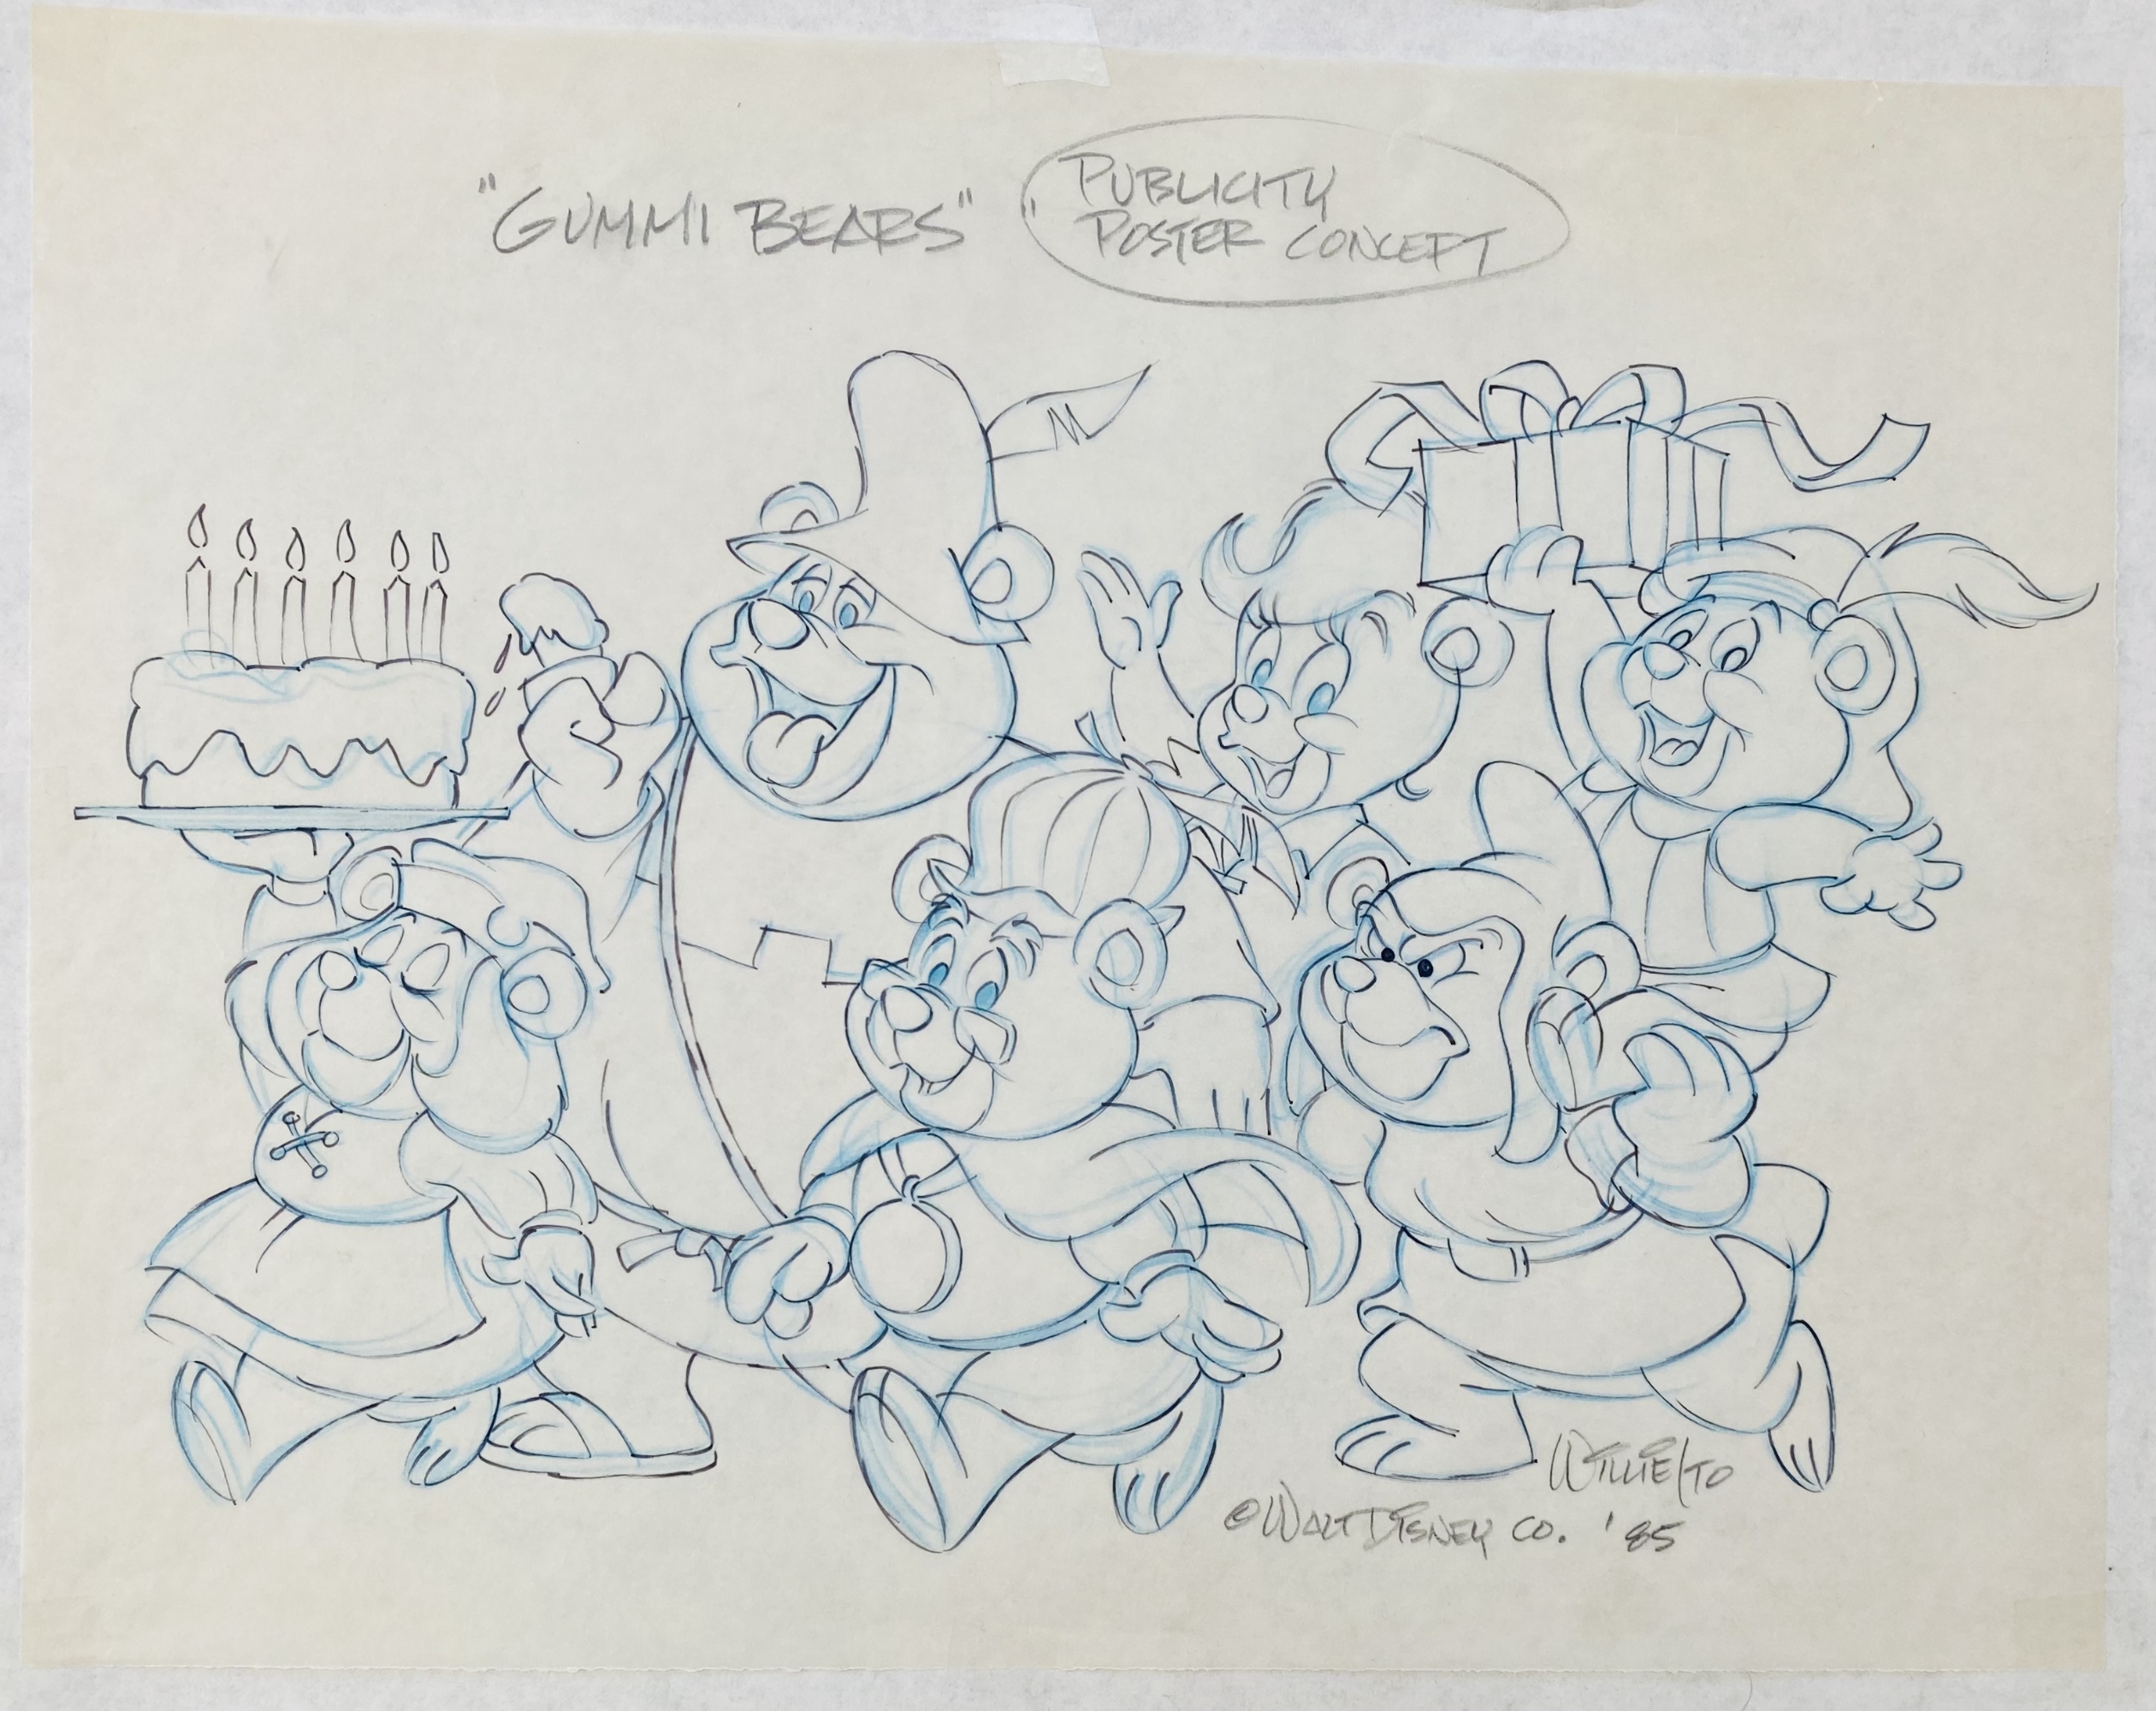 Willie Ito - Adventures of the Gummi Bears - 1985 - Publicity Poster  Concept Drawing, in Monty B's Disney - Animation Artwork - Adventures of  the Gummi Bears Comic Art Gallery Room